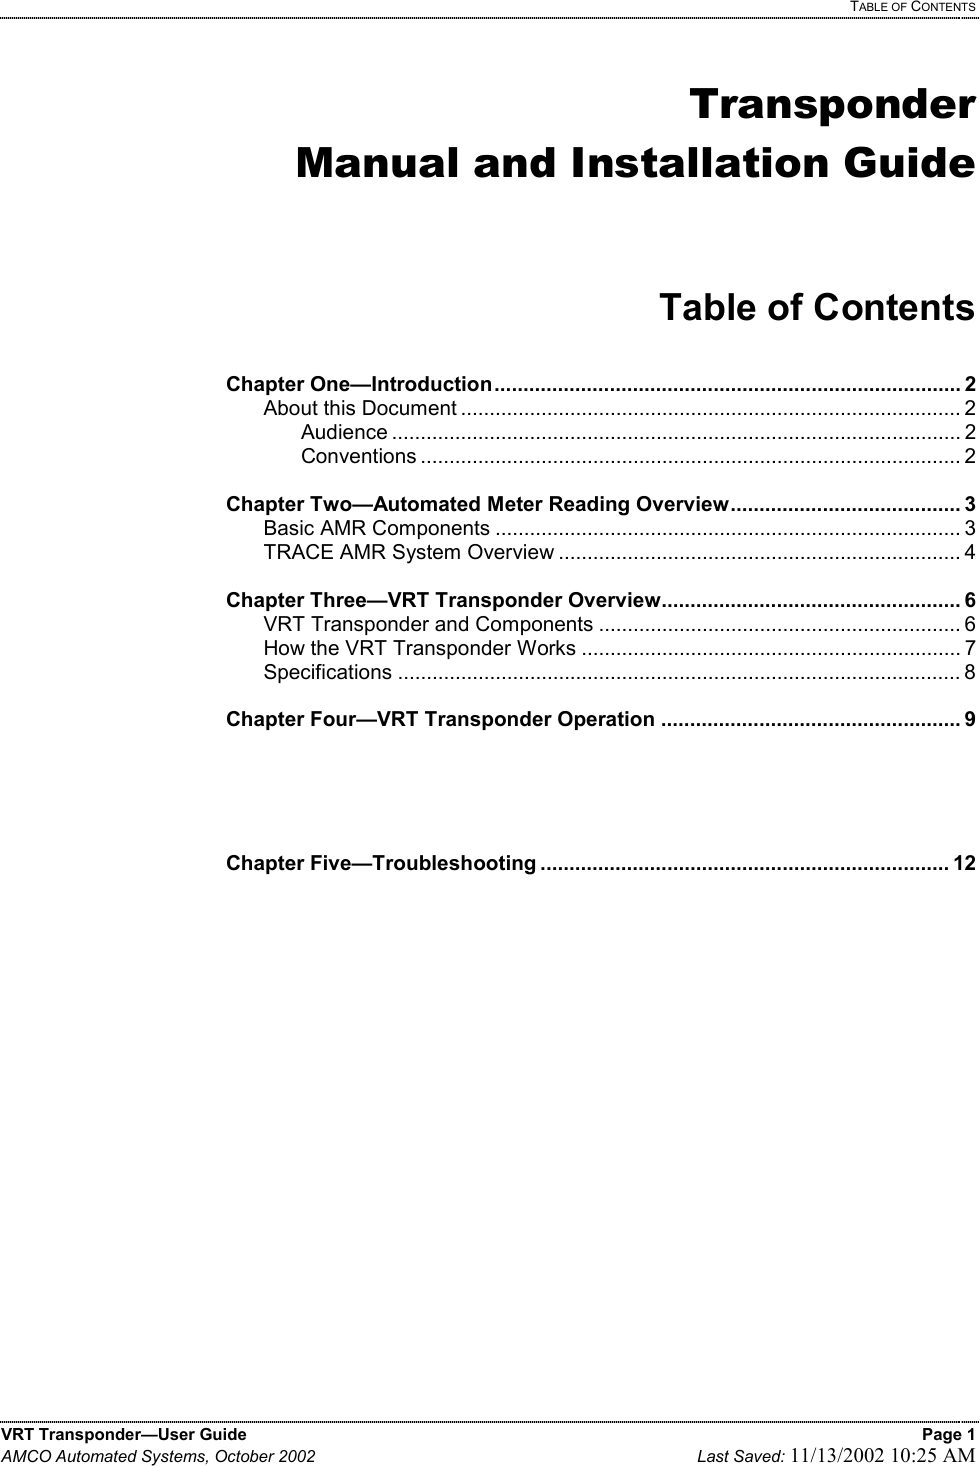   TABLE OF CONTENTS VRT Transponder—User Guide    Page 1 AMCO Automated Systems, October 2002    Last Saved: 11/13/2002 10:25 AM   Transponder Manual and Installation Guide   Table of Contents  Chapter One—Introduction................................................................................. 2   About this Document ....................................................................................... 2   Audience ................................................................................................... 2   Conventions .............................................................................................. 2  Chapter Two—Automated Meter Reading Overview........................................ 3  Basic AMR Components ................................................................................. 3   TRACE AMR System Overview ...................................................................... 4  Chapter Three—VRT Transponder Overview.................................................... 6   VRT Transponder and Components ............................................................... 6   How the VRT Transponder Works .................................................................. 7  Specifications .................................................................................................. 8  Chapter Four—VRT Transponder Operation .................................................... 9      Chapter Five—Troubleshooting ....................................................................... 12           